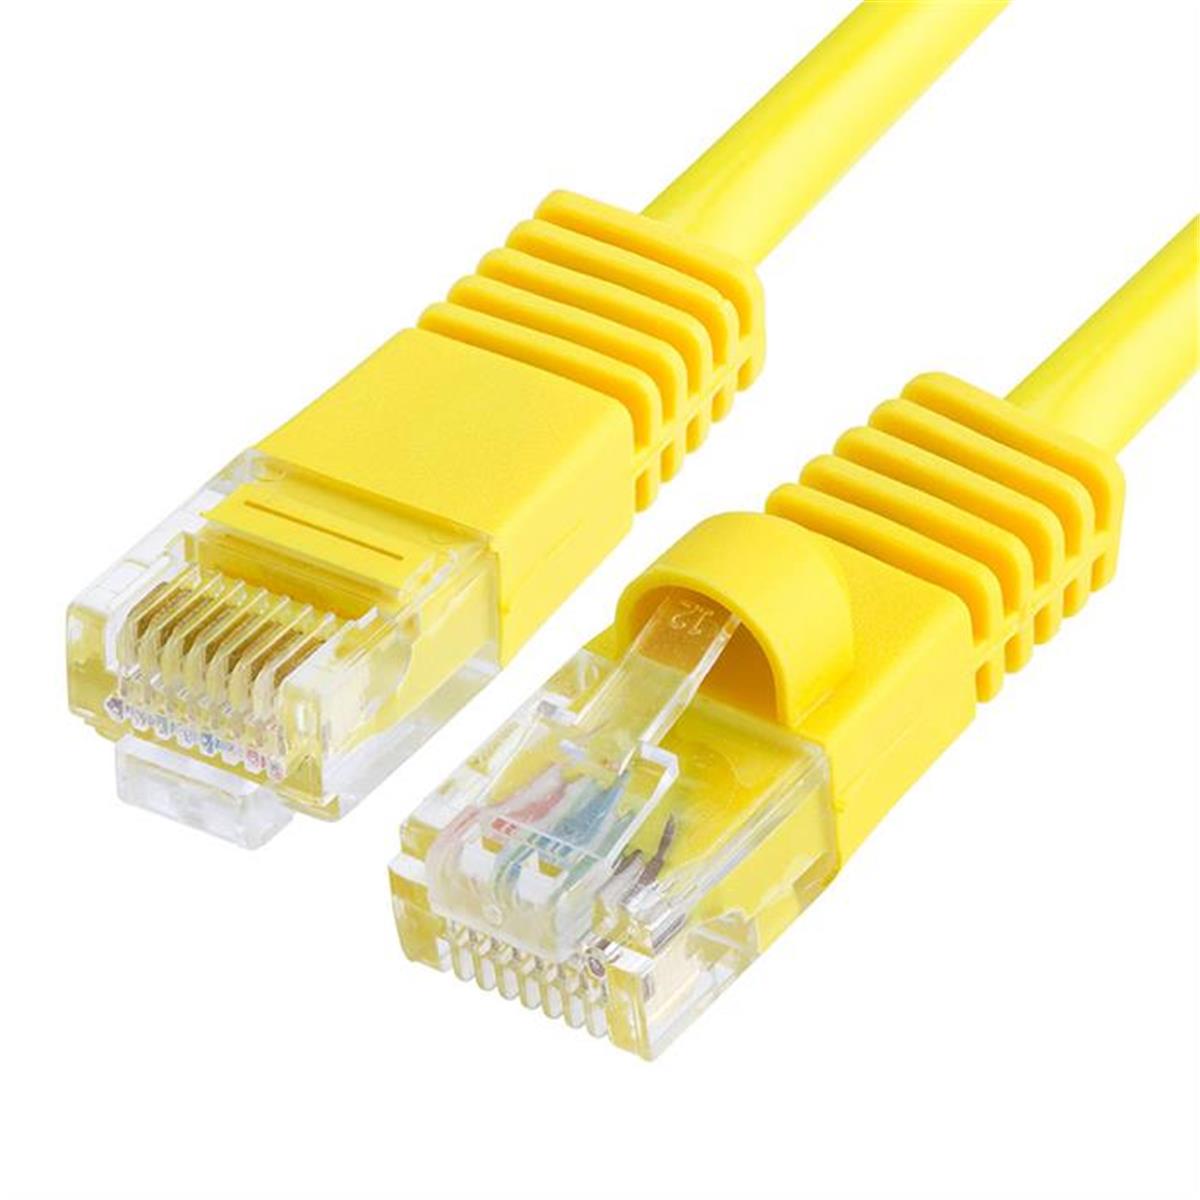 Picture of CMPLE 874-N 350 MHz RJ45 Cat5e Ethernet Network Patch Cable - 10 ft. - Yellow